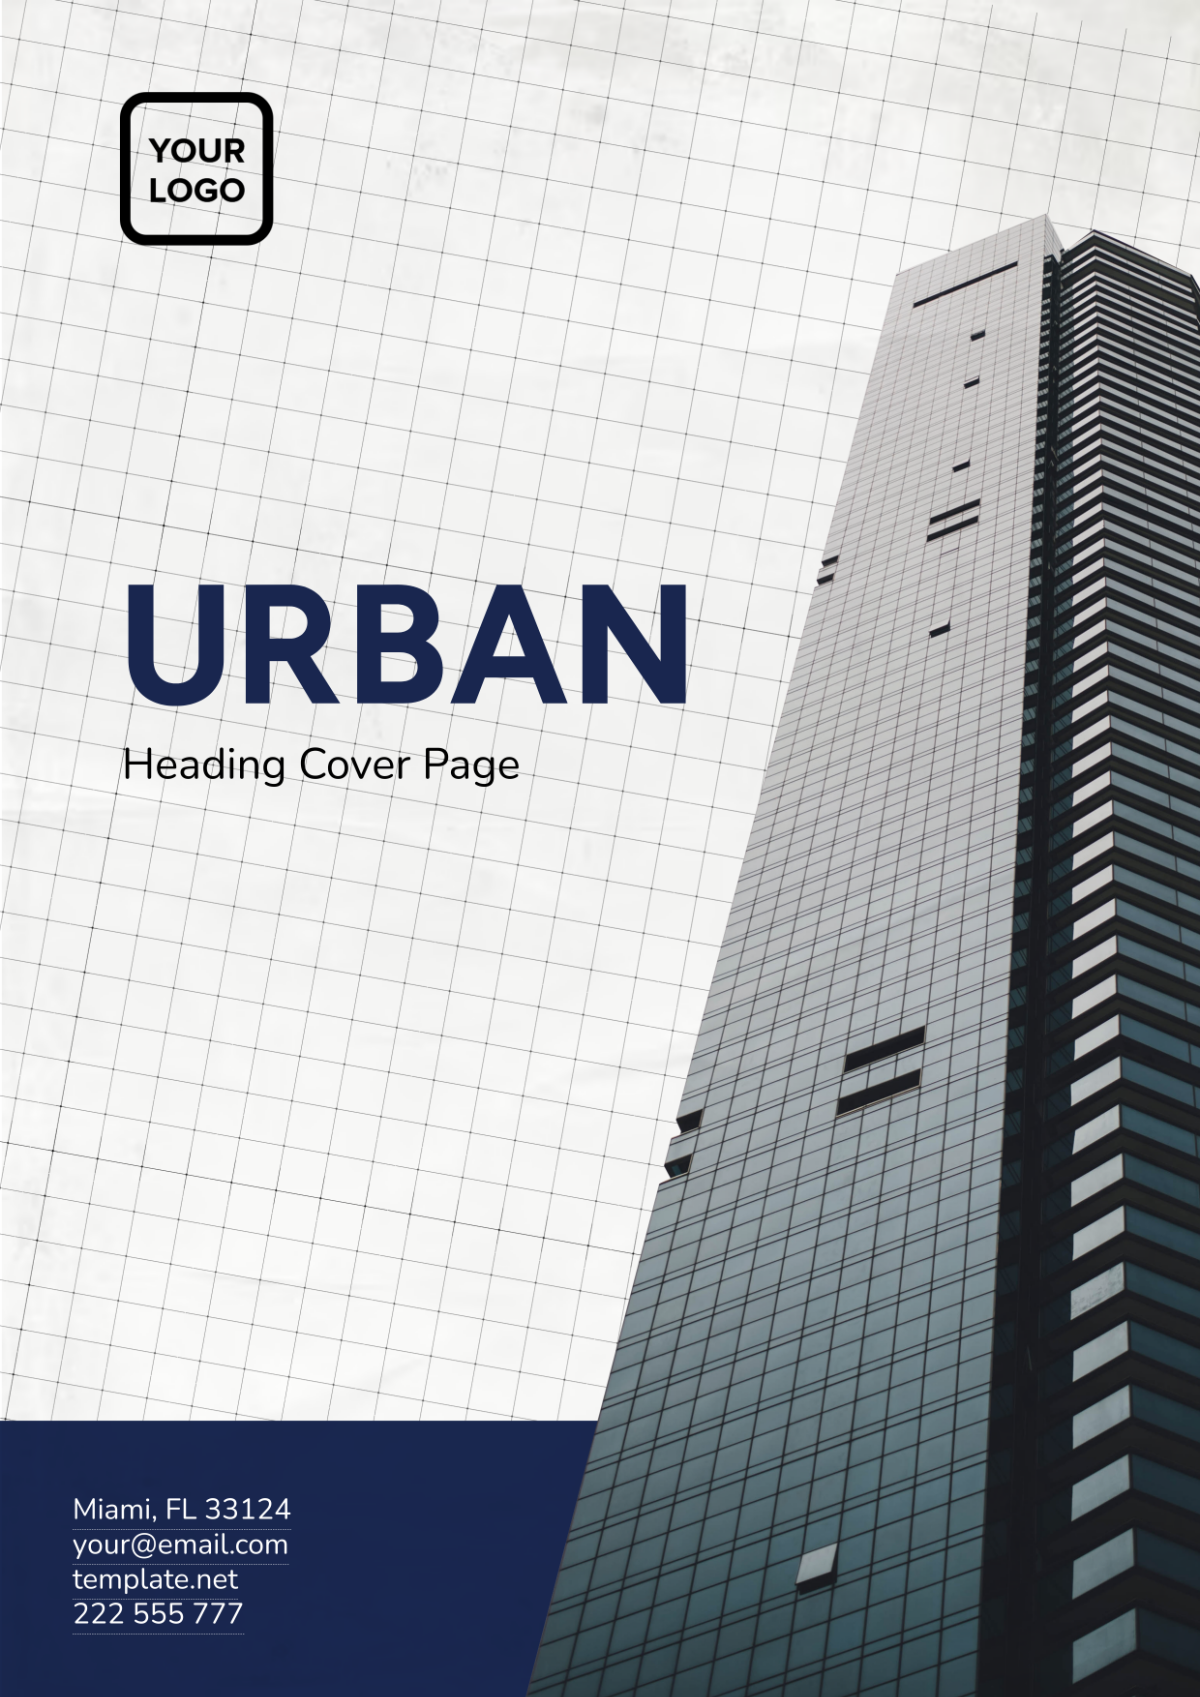 Urban Heading Cover Page Template